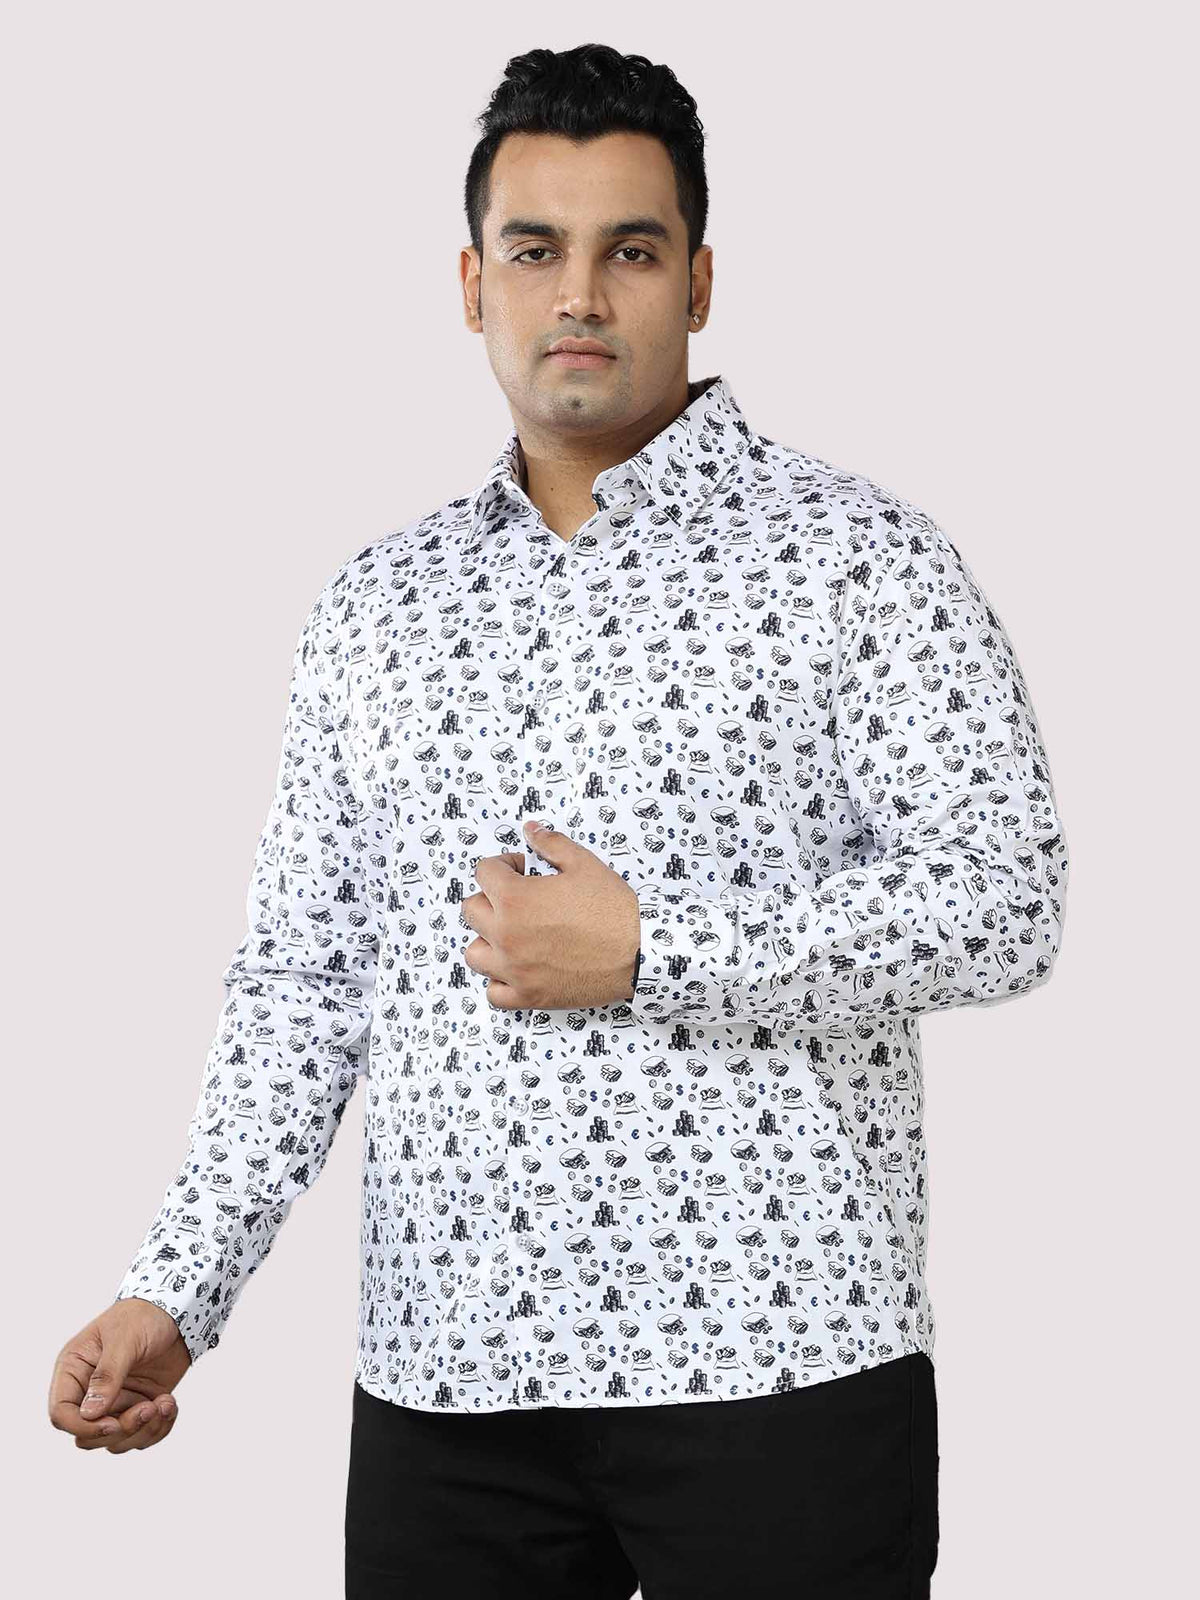 Currency Printed Cotton Full Shirt Men's Plus Size